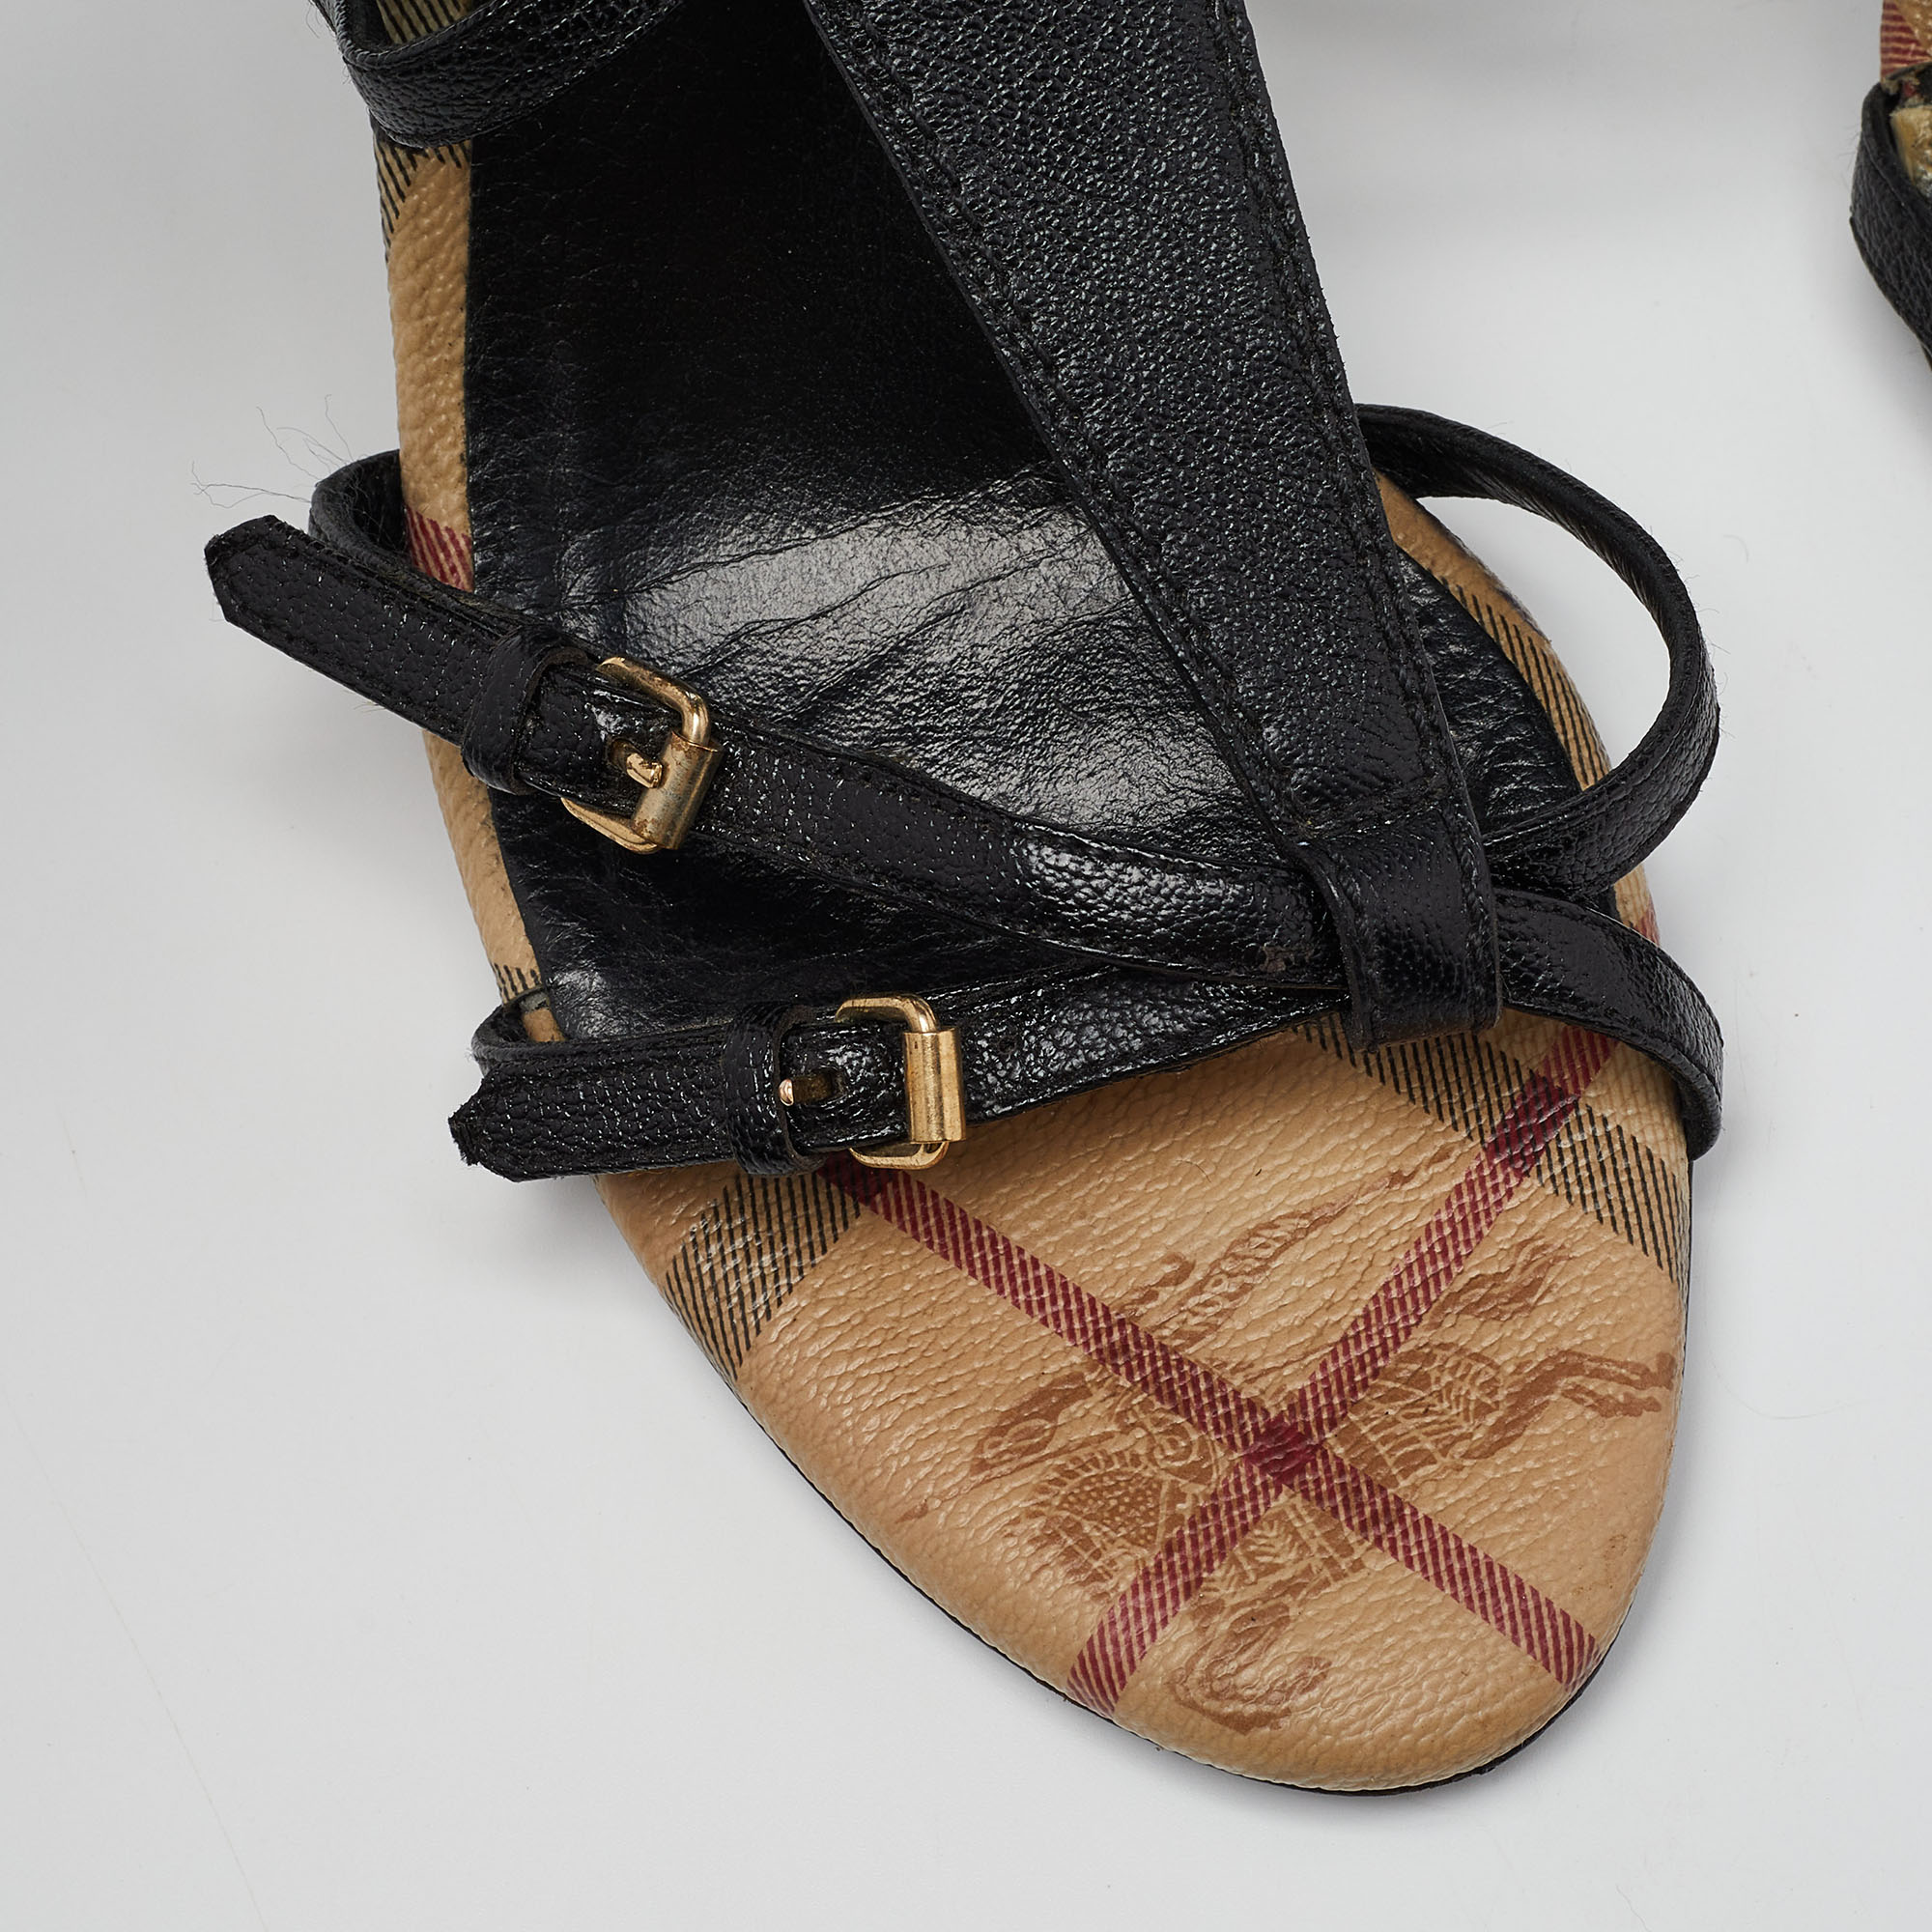 Burberry Black Leather T-Bar Ankle Strap Sandals Size 39